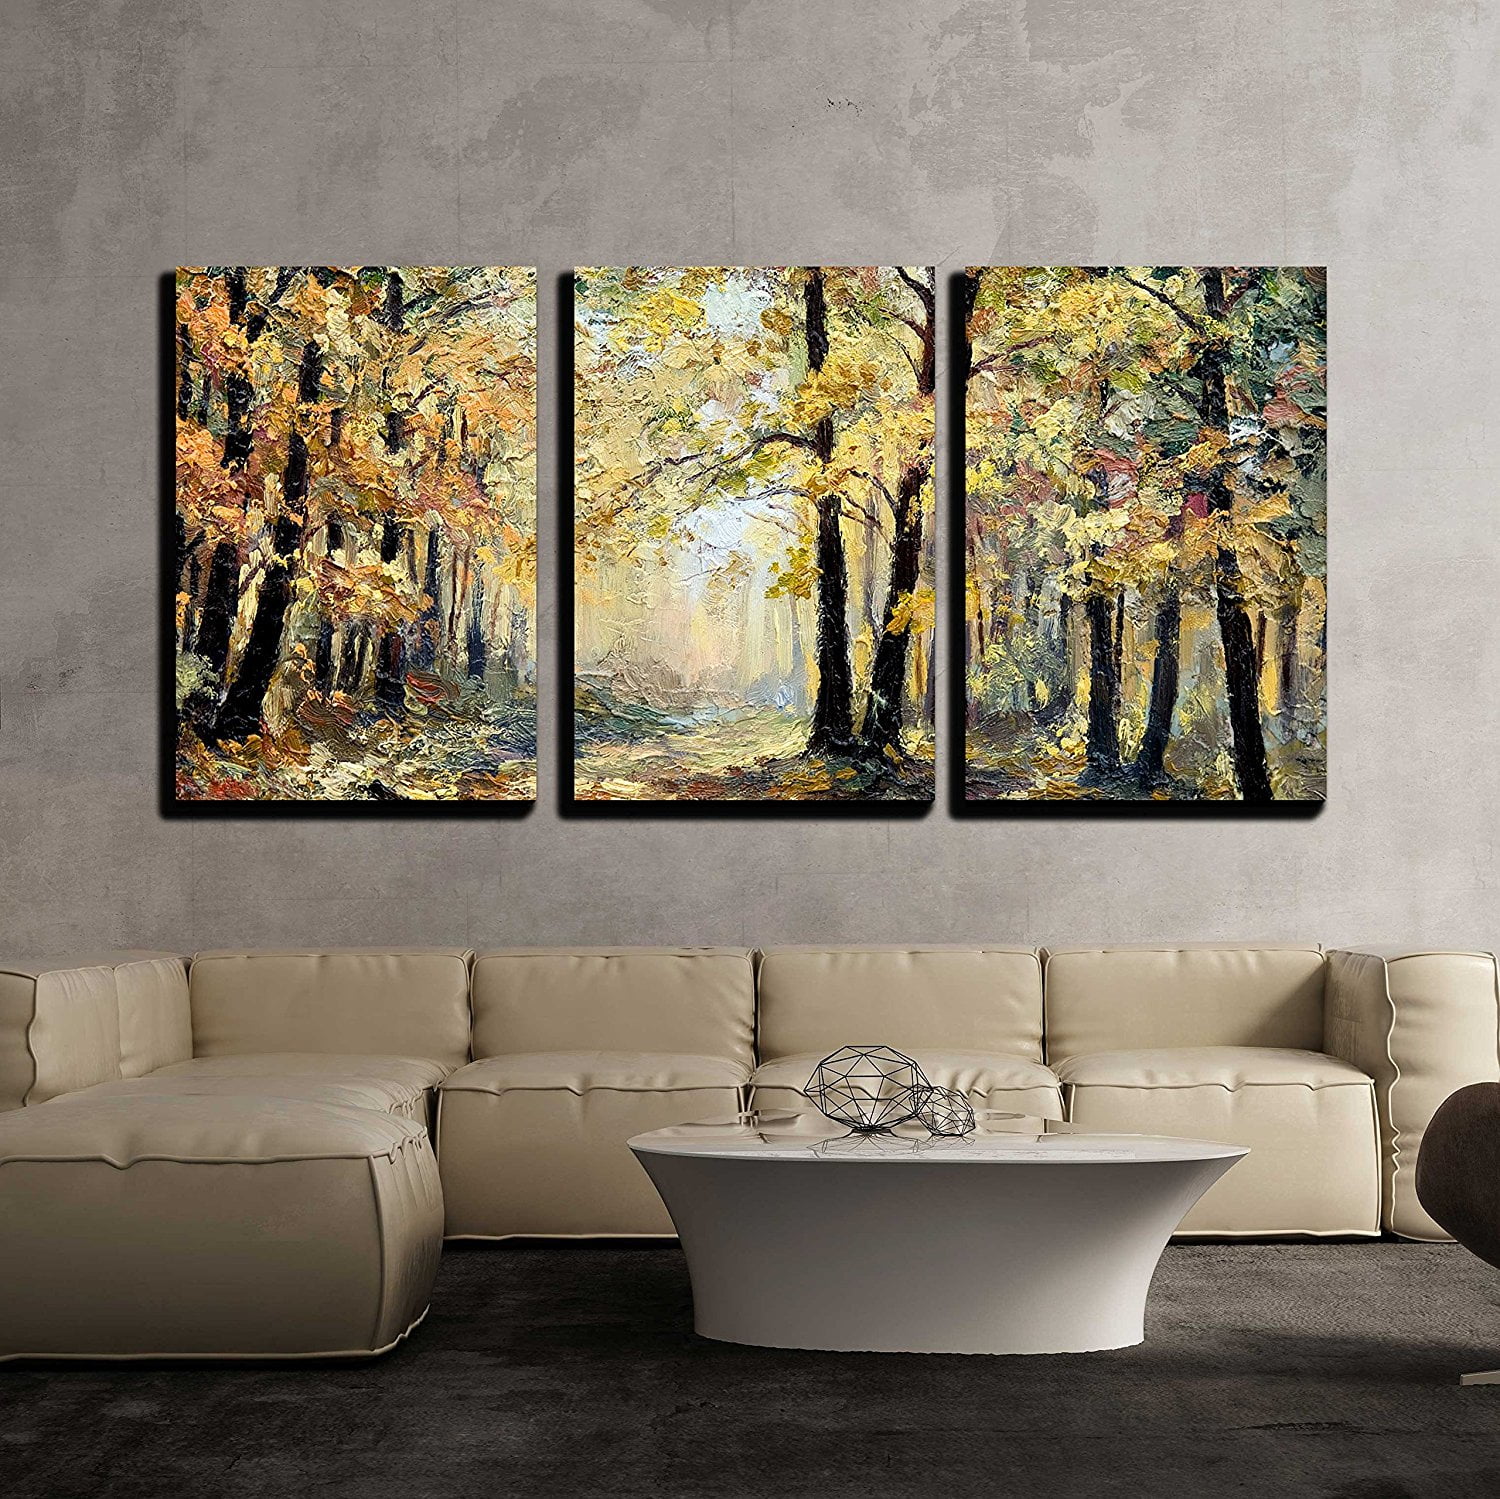 Canvas Paintings Chinese Style Landscape Forest Bird Mountain Wall Print Decor 